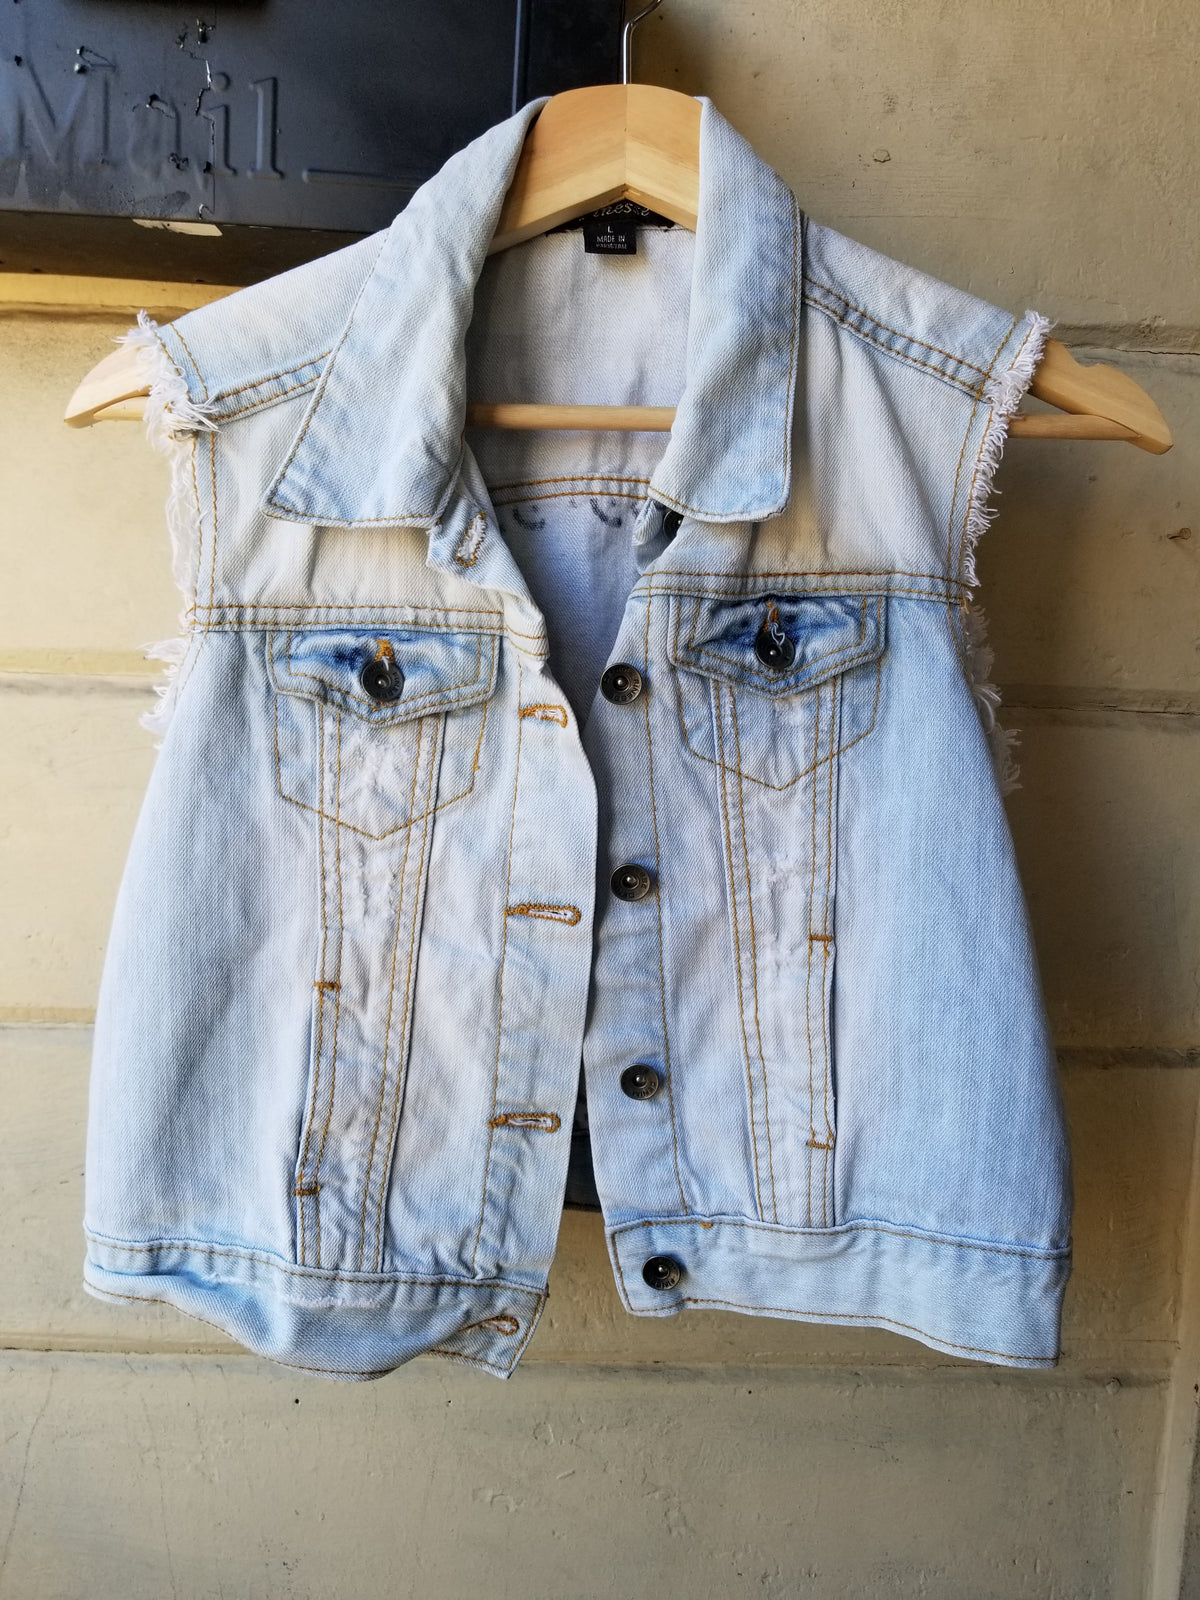 SOLD - Upcycled Jean Jacket Vegan Club collab with @humanetrafficking